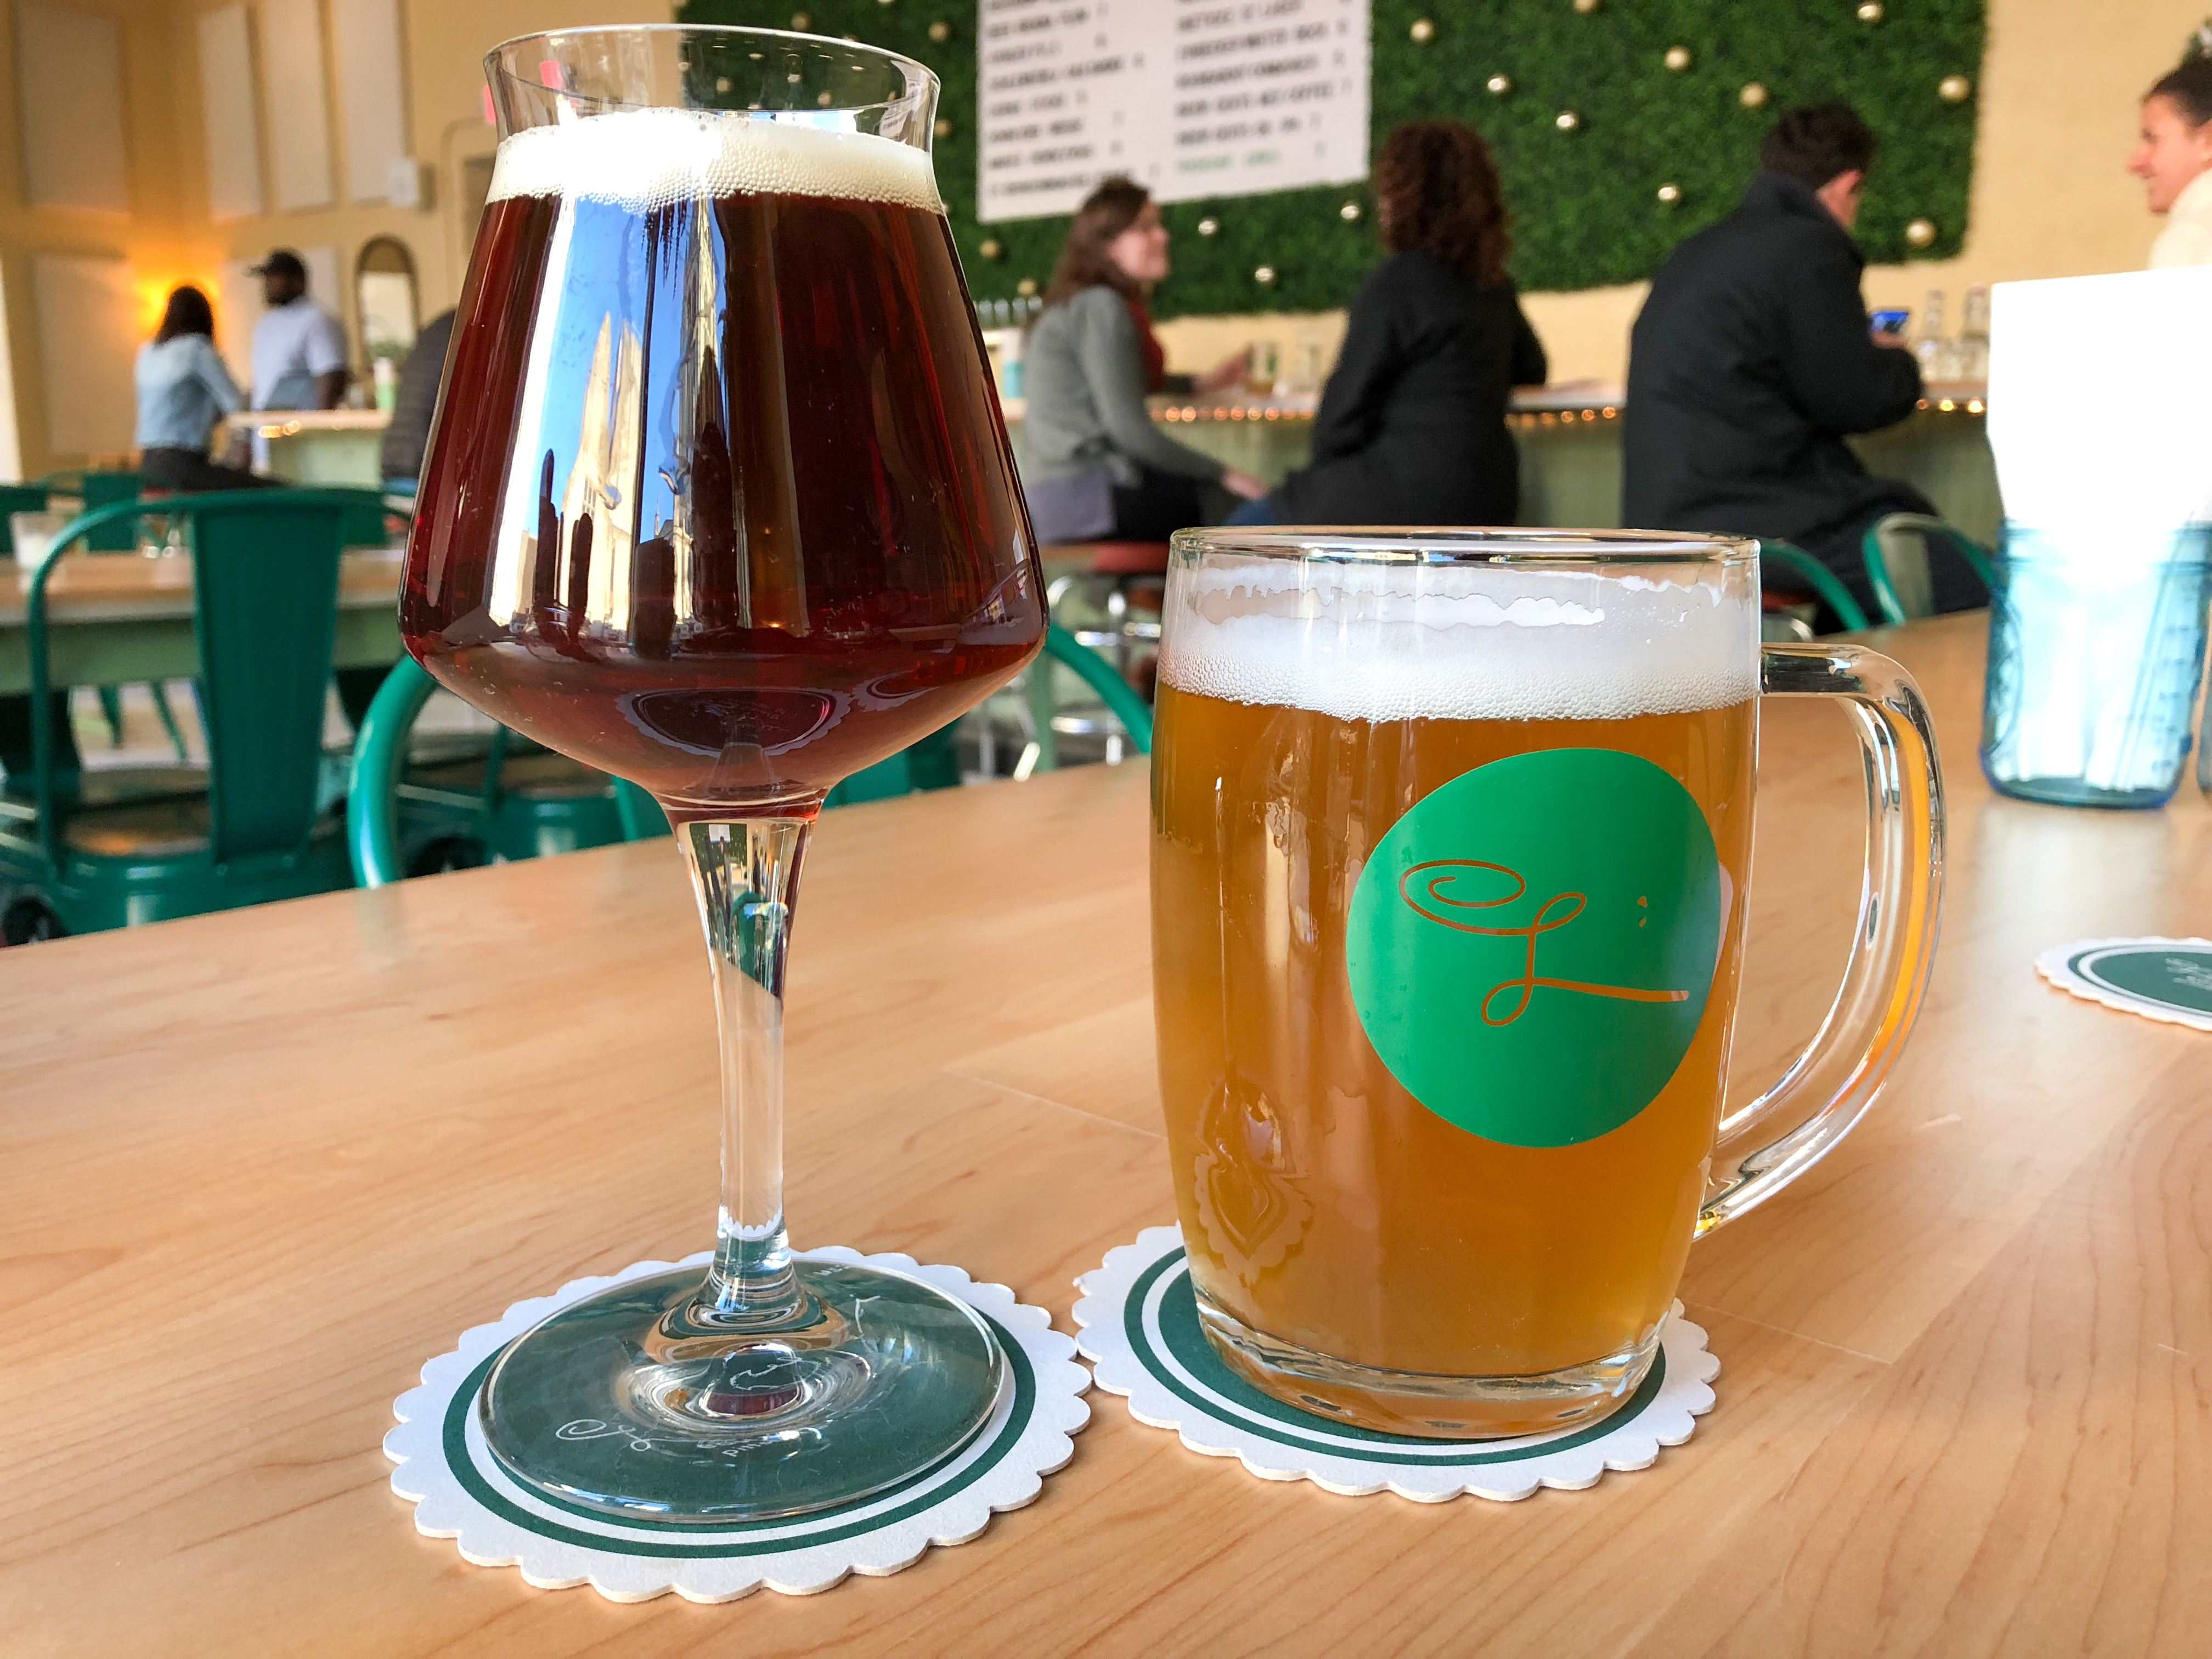 The long-stemmed tulip glass has a pour of Einbecker Winter-Bock, a German doppelbock. In the stein is the Únětické Pivo 12°, a Czech lager. Notice East Liberty Presbyterian Church reflected on the tulip glass.